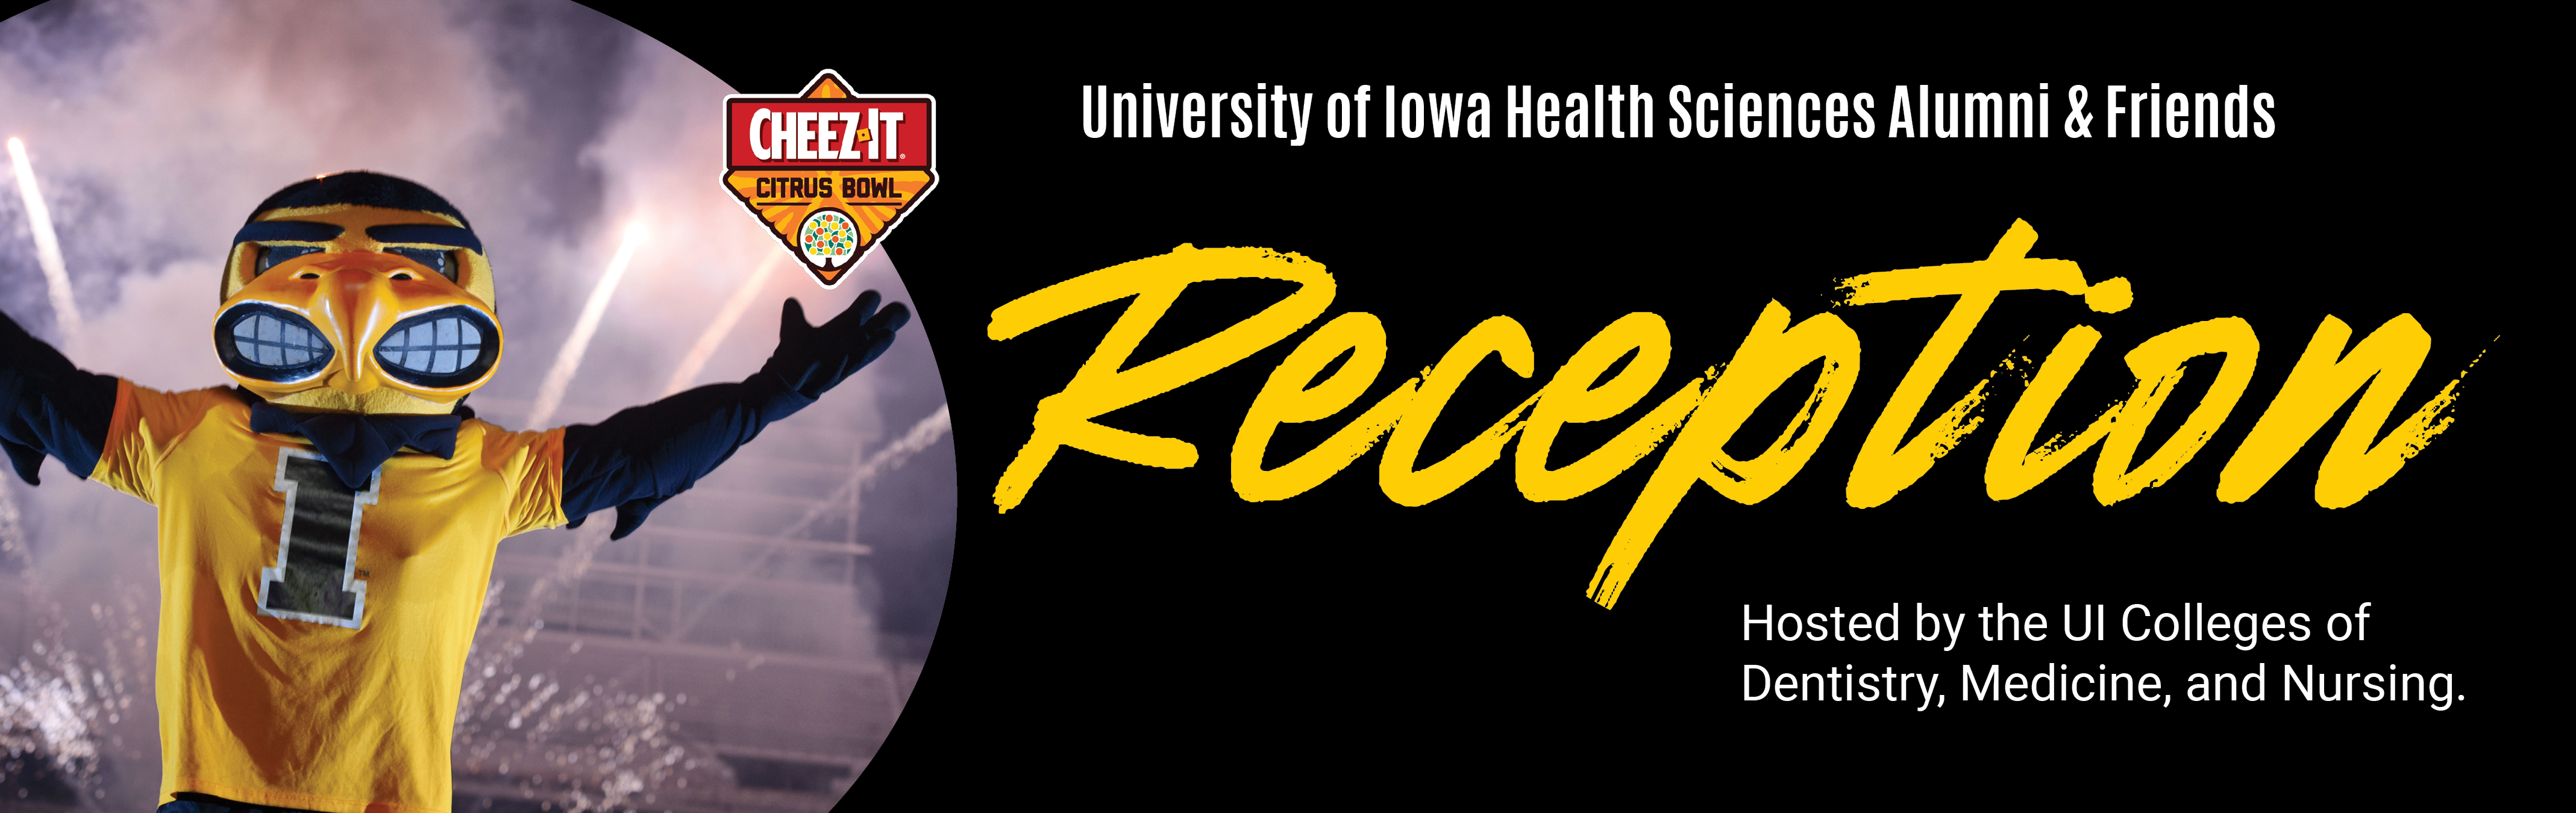 Image Text: University of Iowa Health Sciences Alumni & Friends Reception, Hosted by the UI Colleges of Dentistry, Medicine, and Nursing